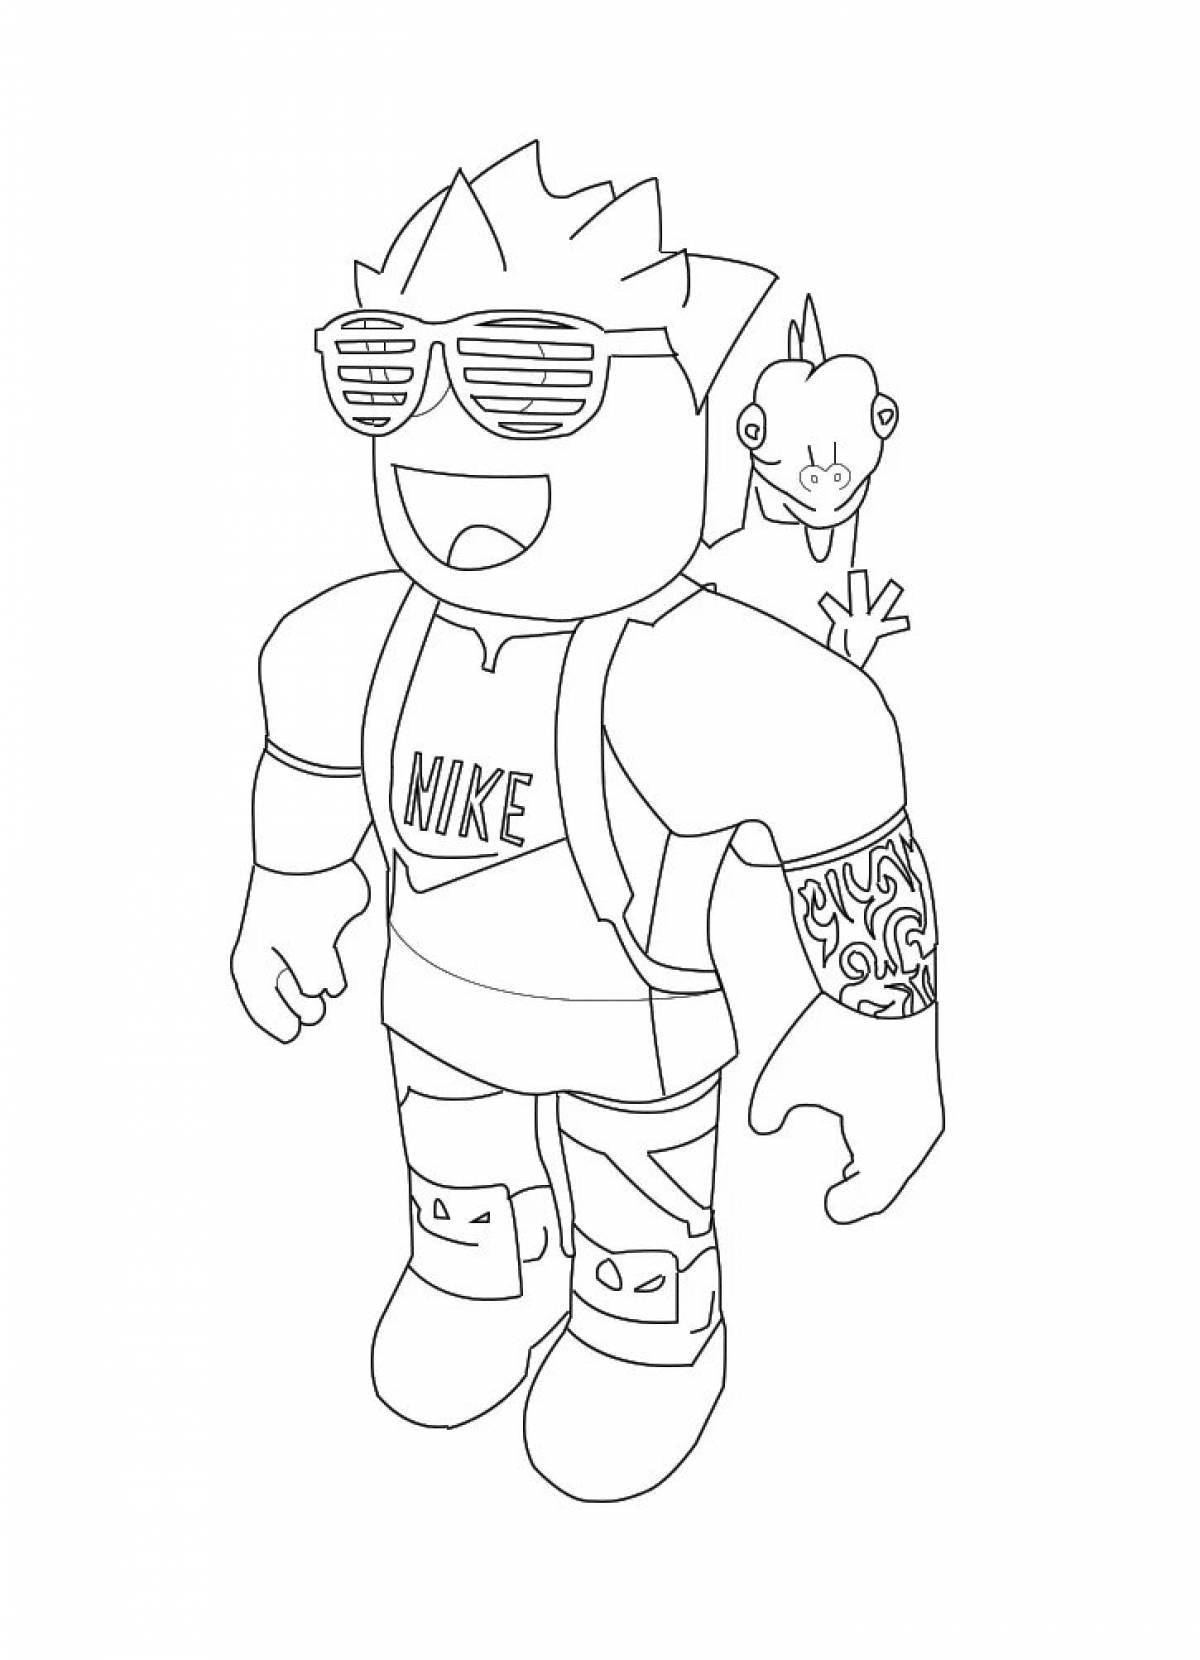 Roblox player coloring page